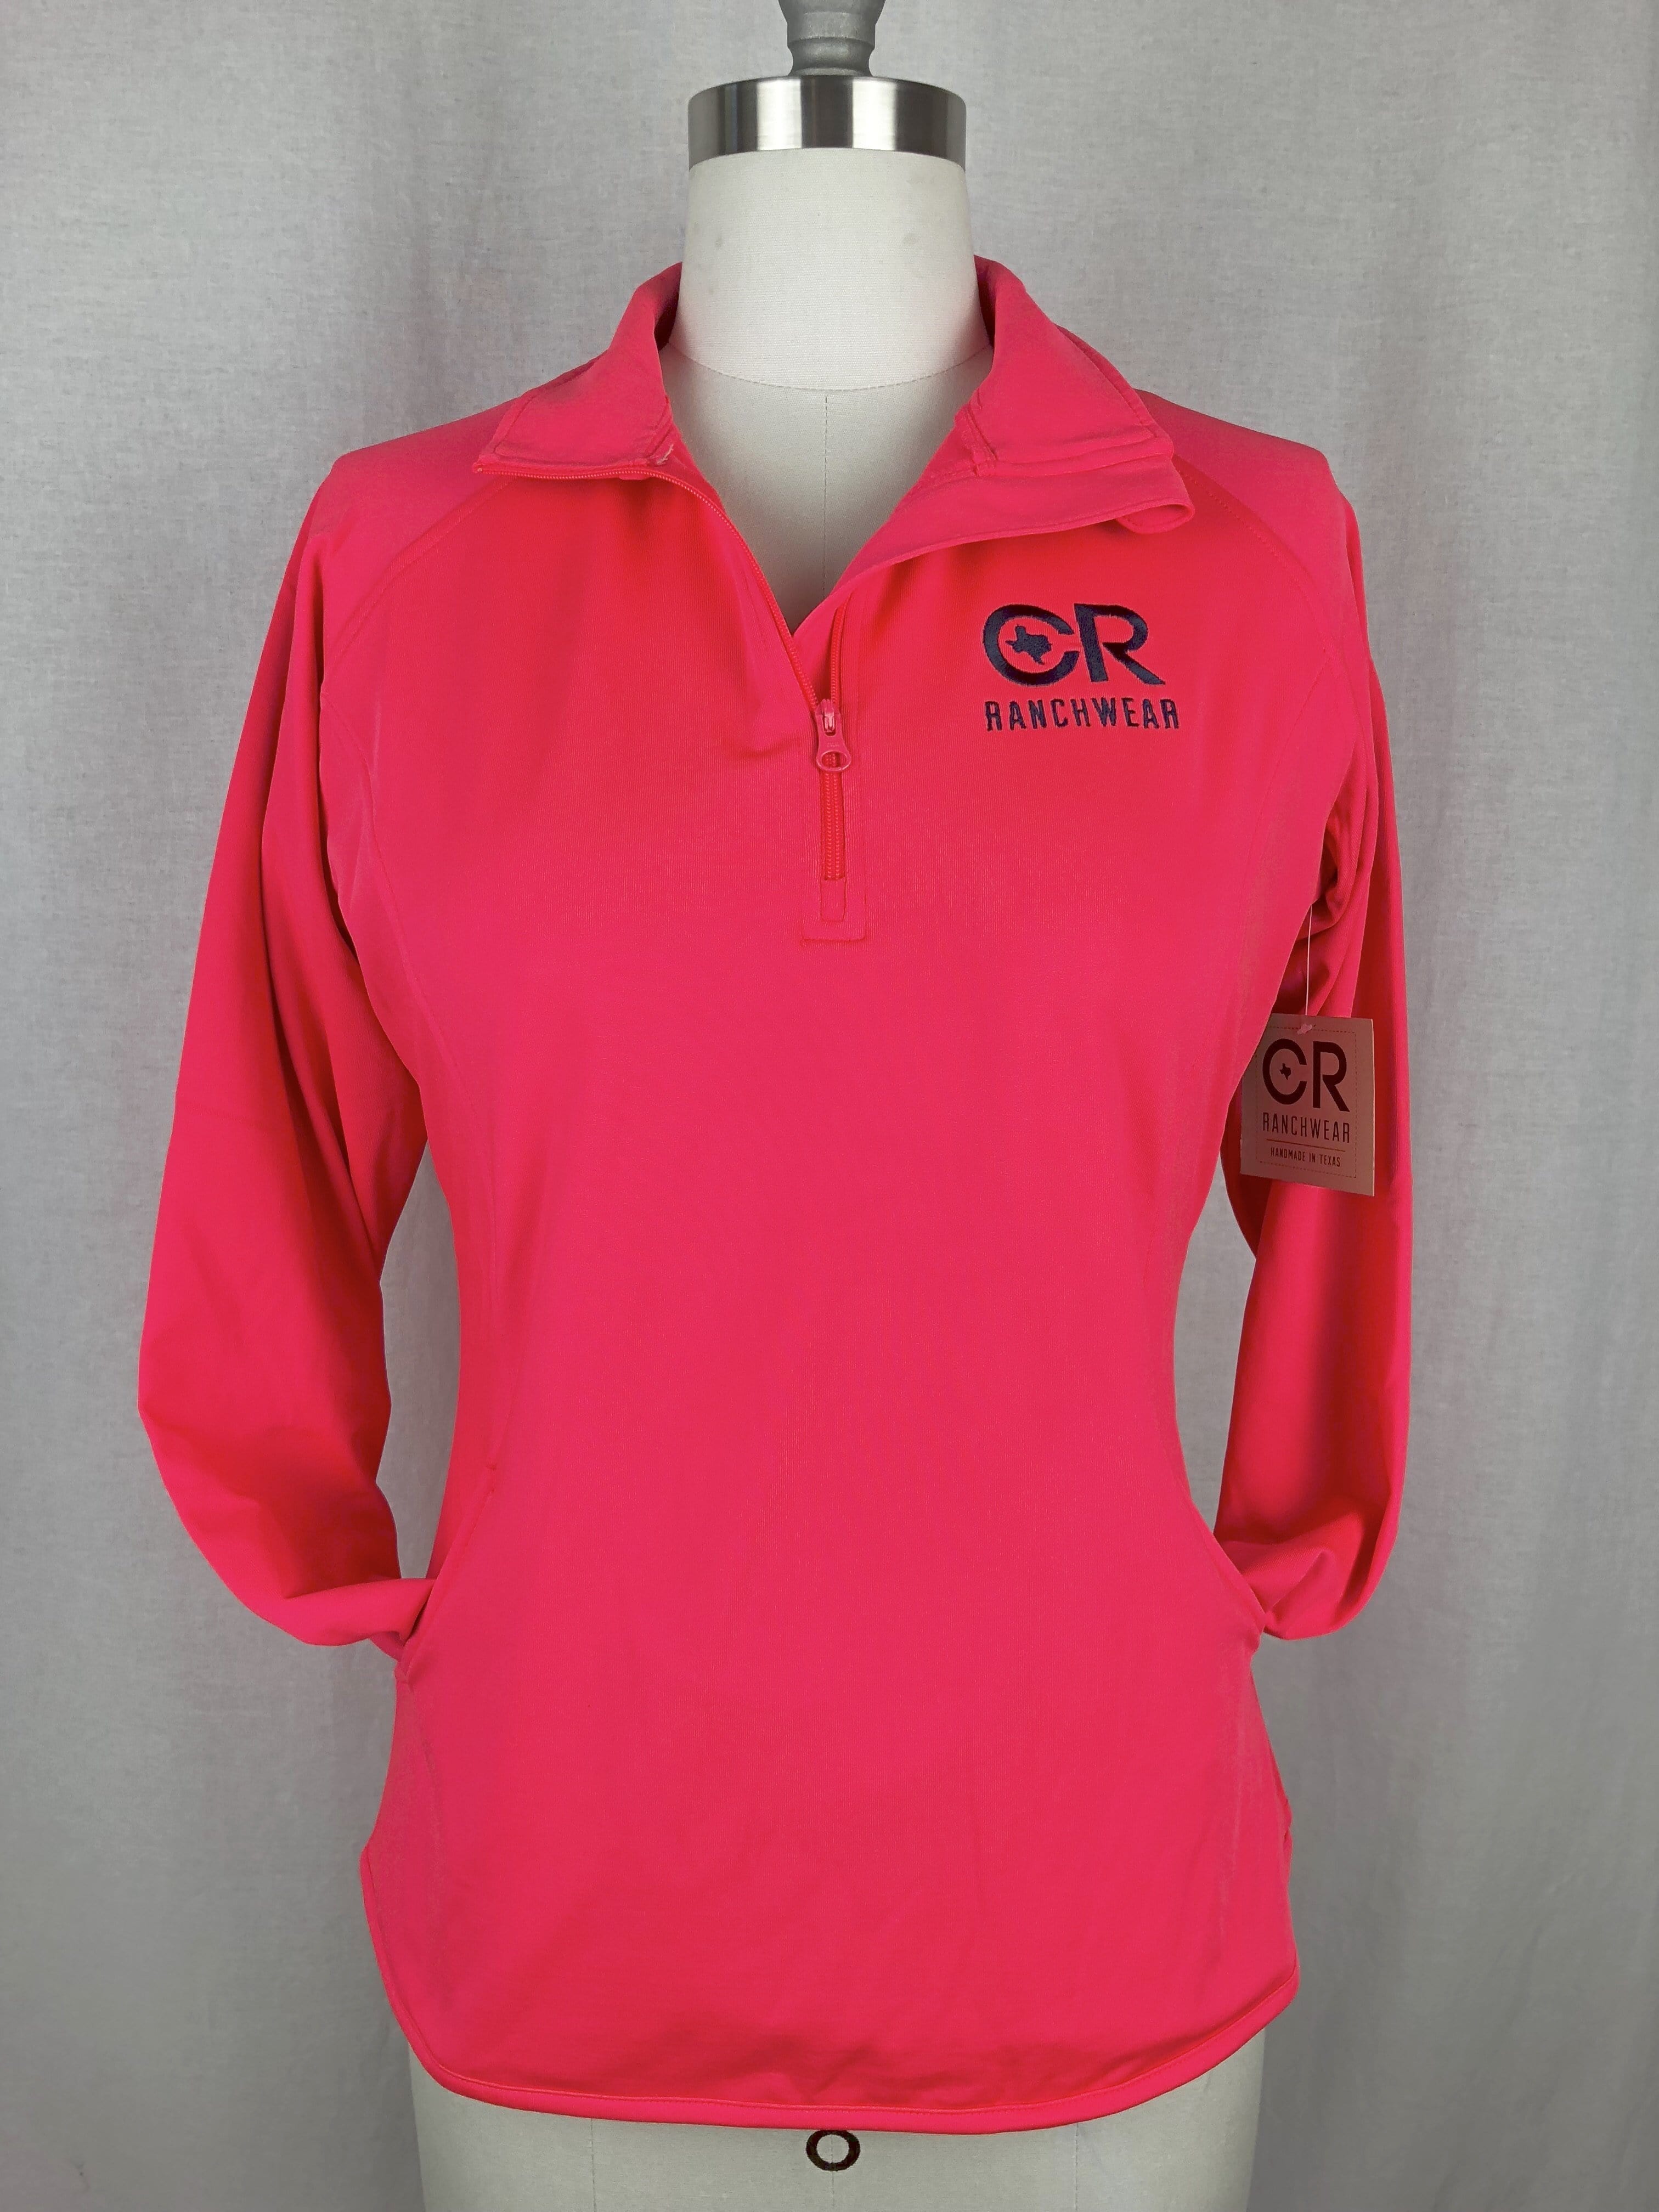 Buy CR Women's Hot Coral 1/4 Zip at CR RanchWear for only $48.00